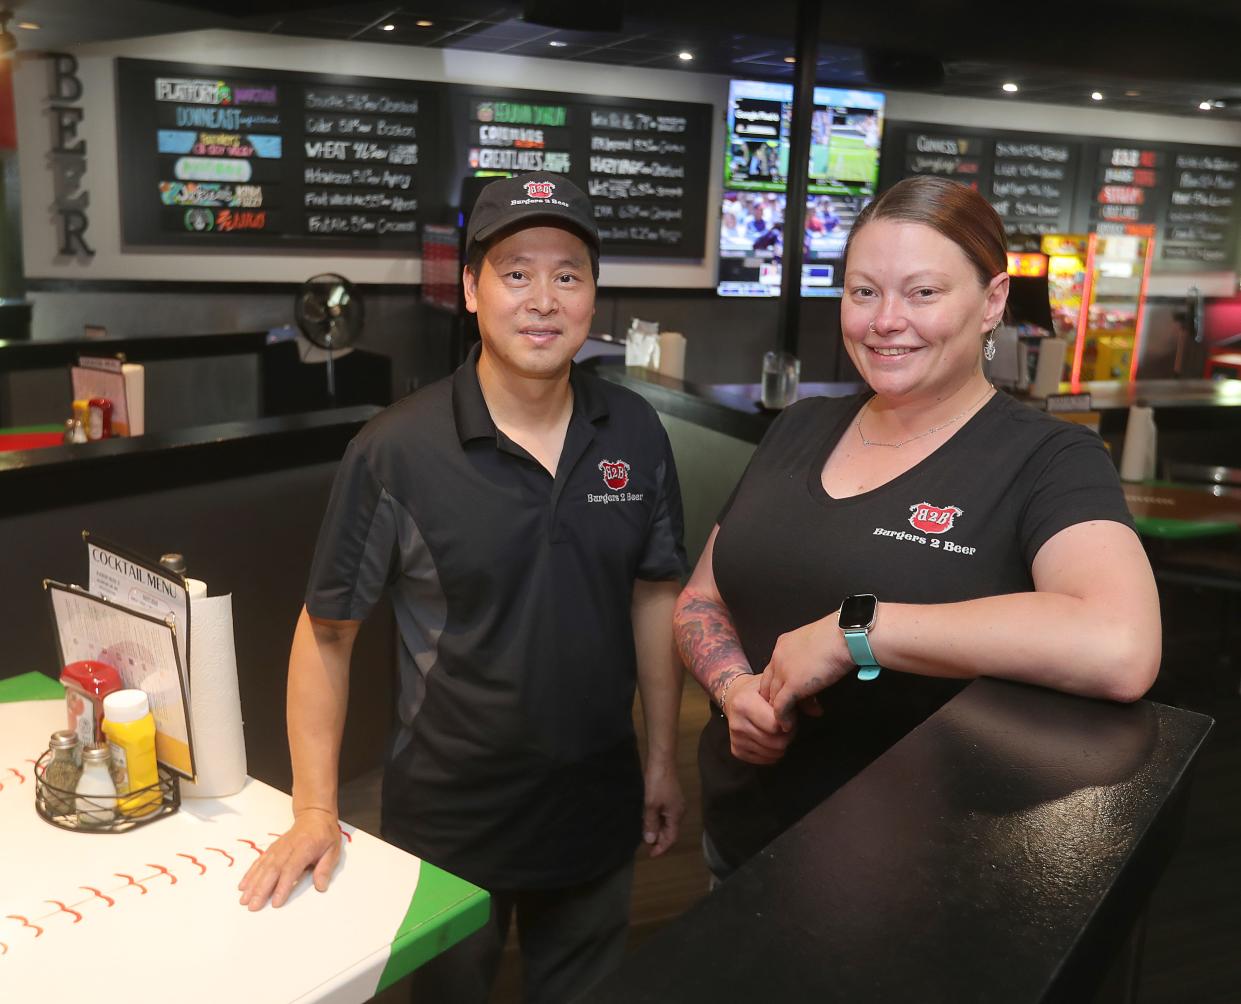 Burgers 2 Beer owner Yong Hao Chen and manager Nicole Magee show off the new restaurant June 29 in Twinsburg.